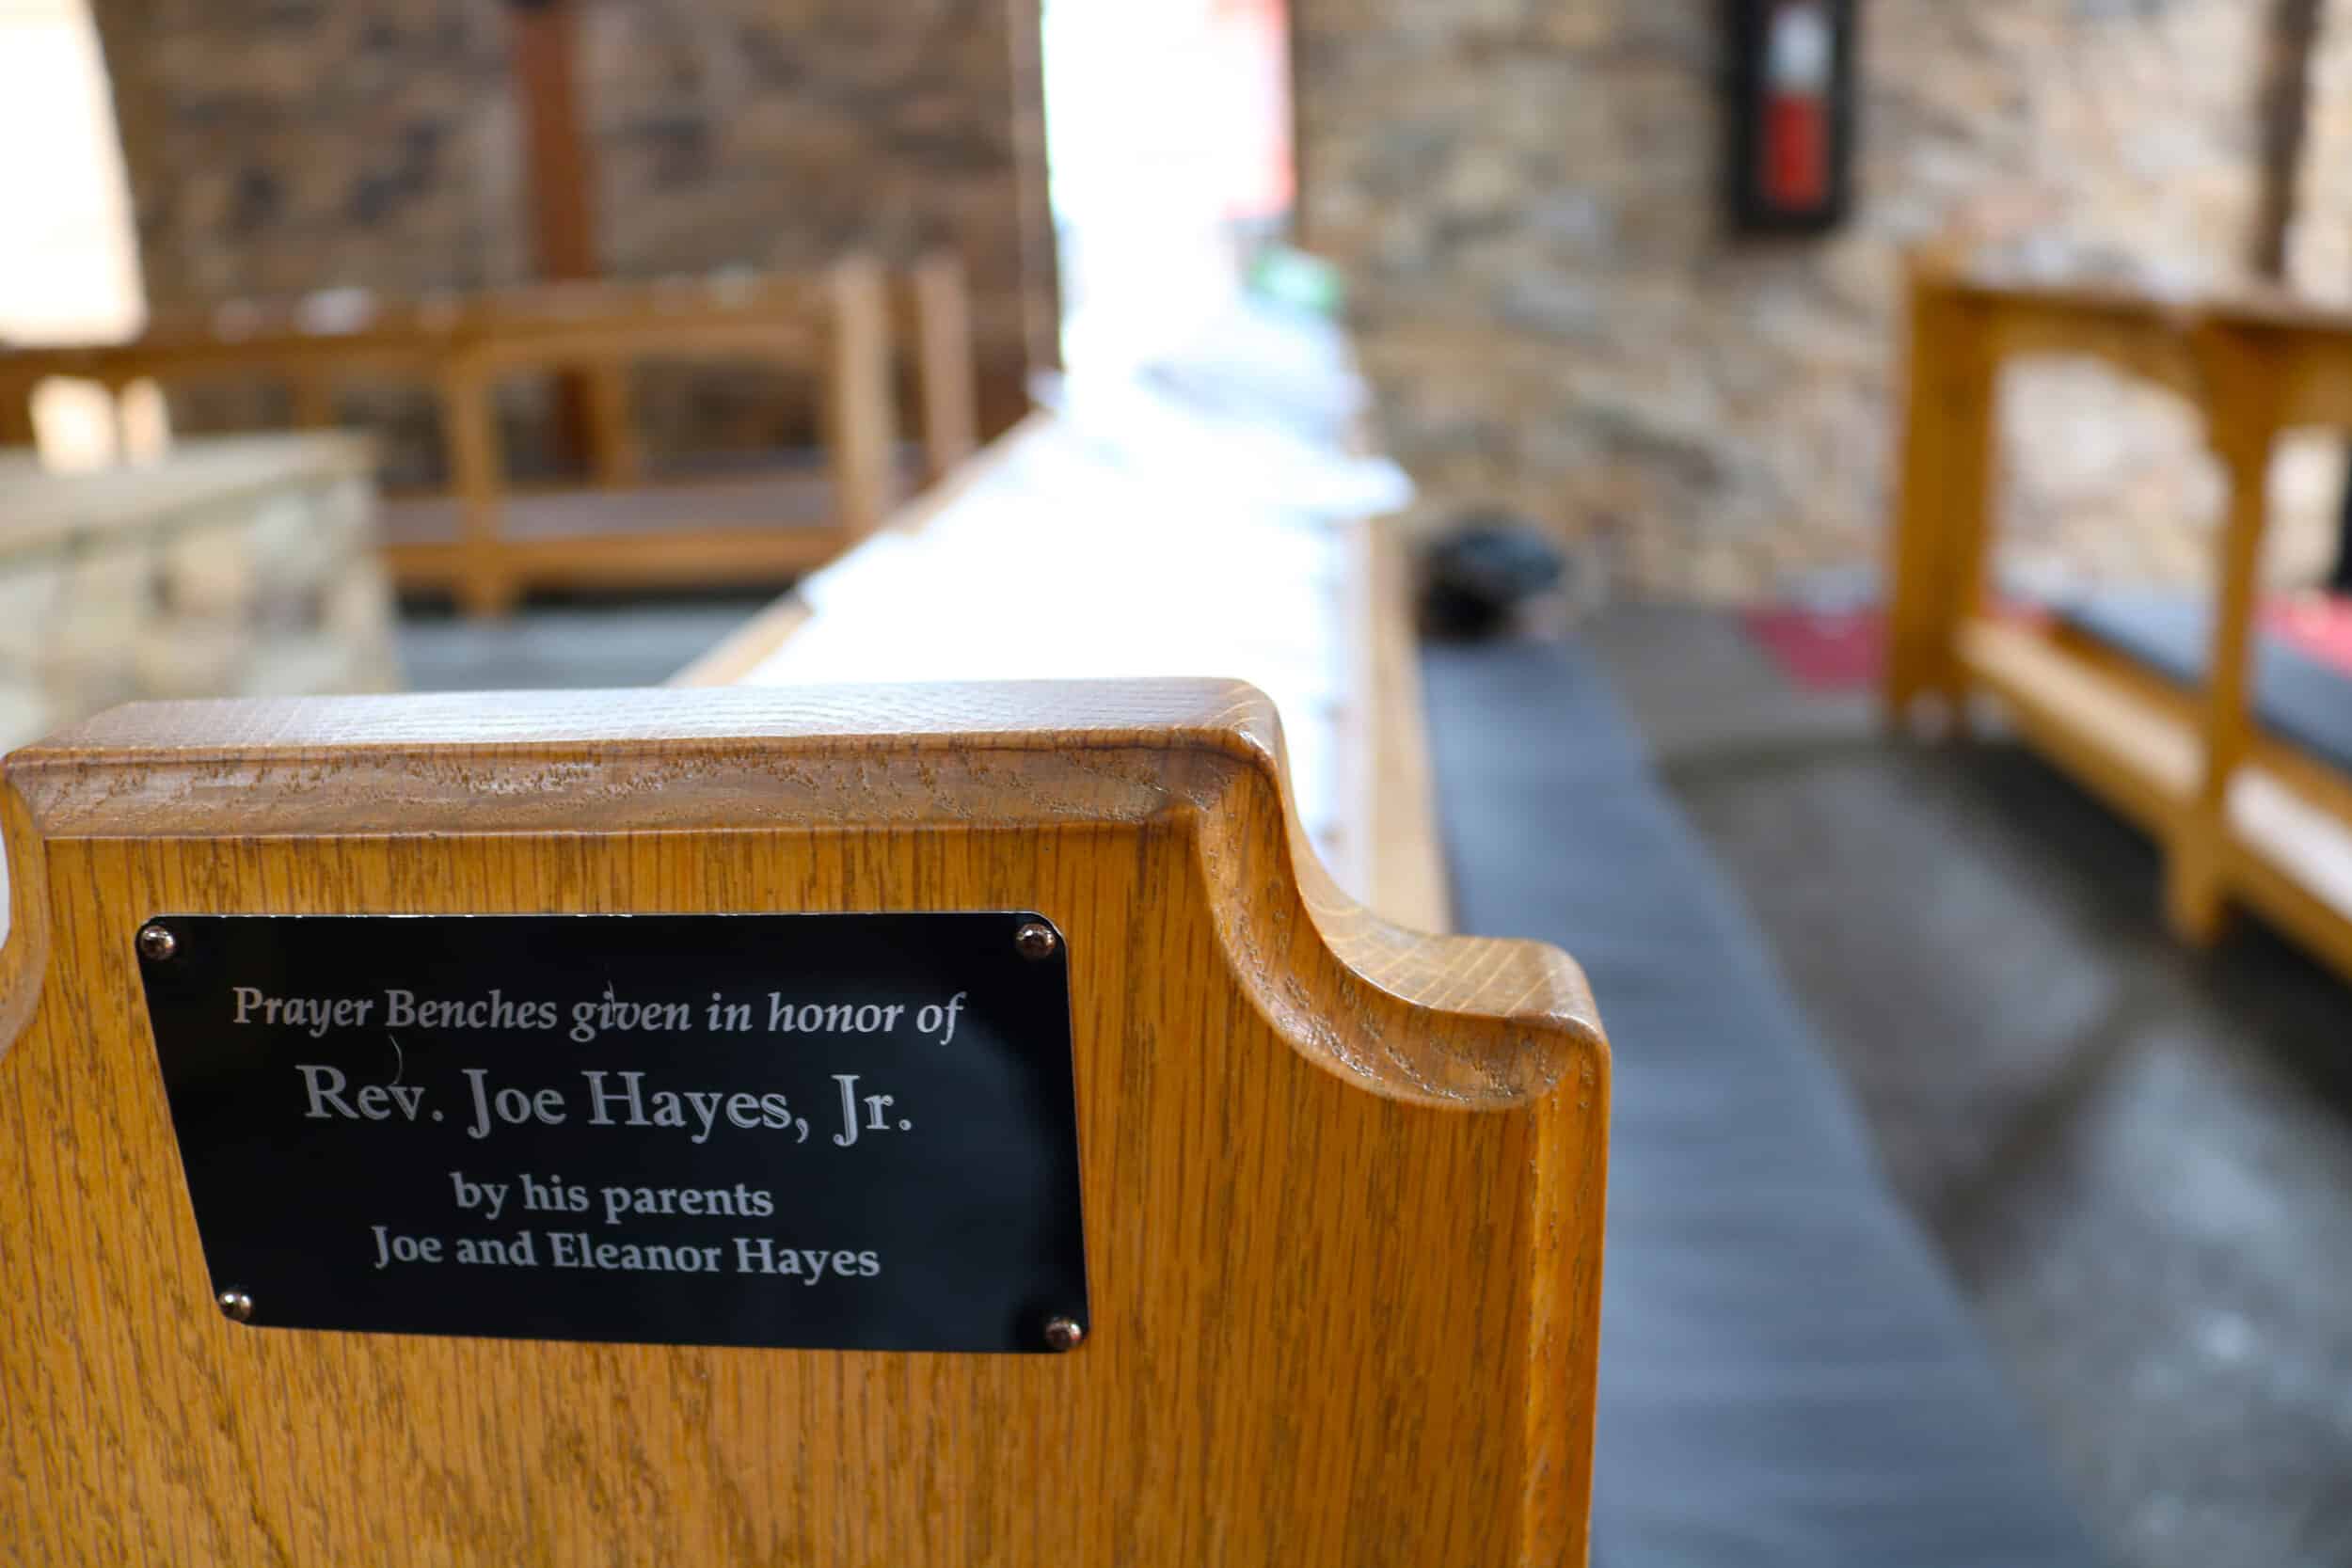 Prayer benches, which were given in honor of Reverend Joe Hayes, Jr. by his parents Joe and Eleanor Hayes. The benches are where students can come and sit, kneel, or even lay down and pray, or even just sit there and think.